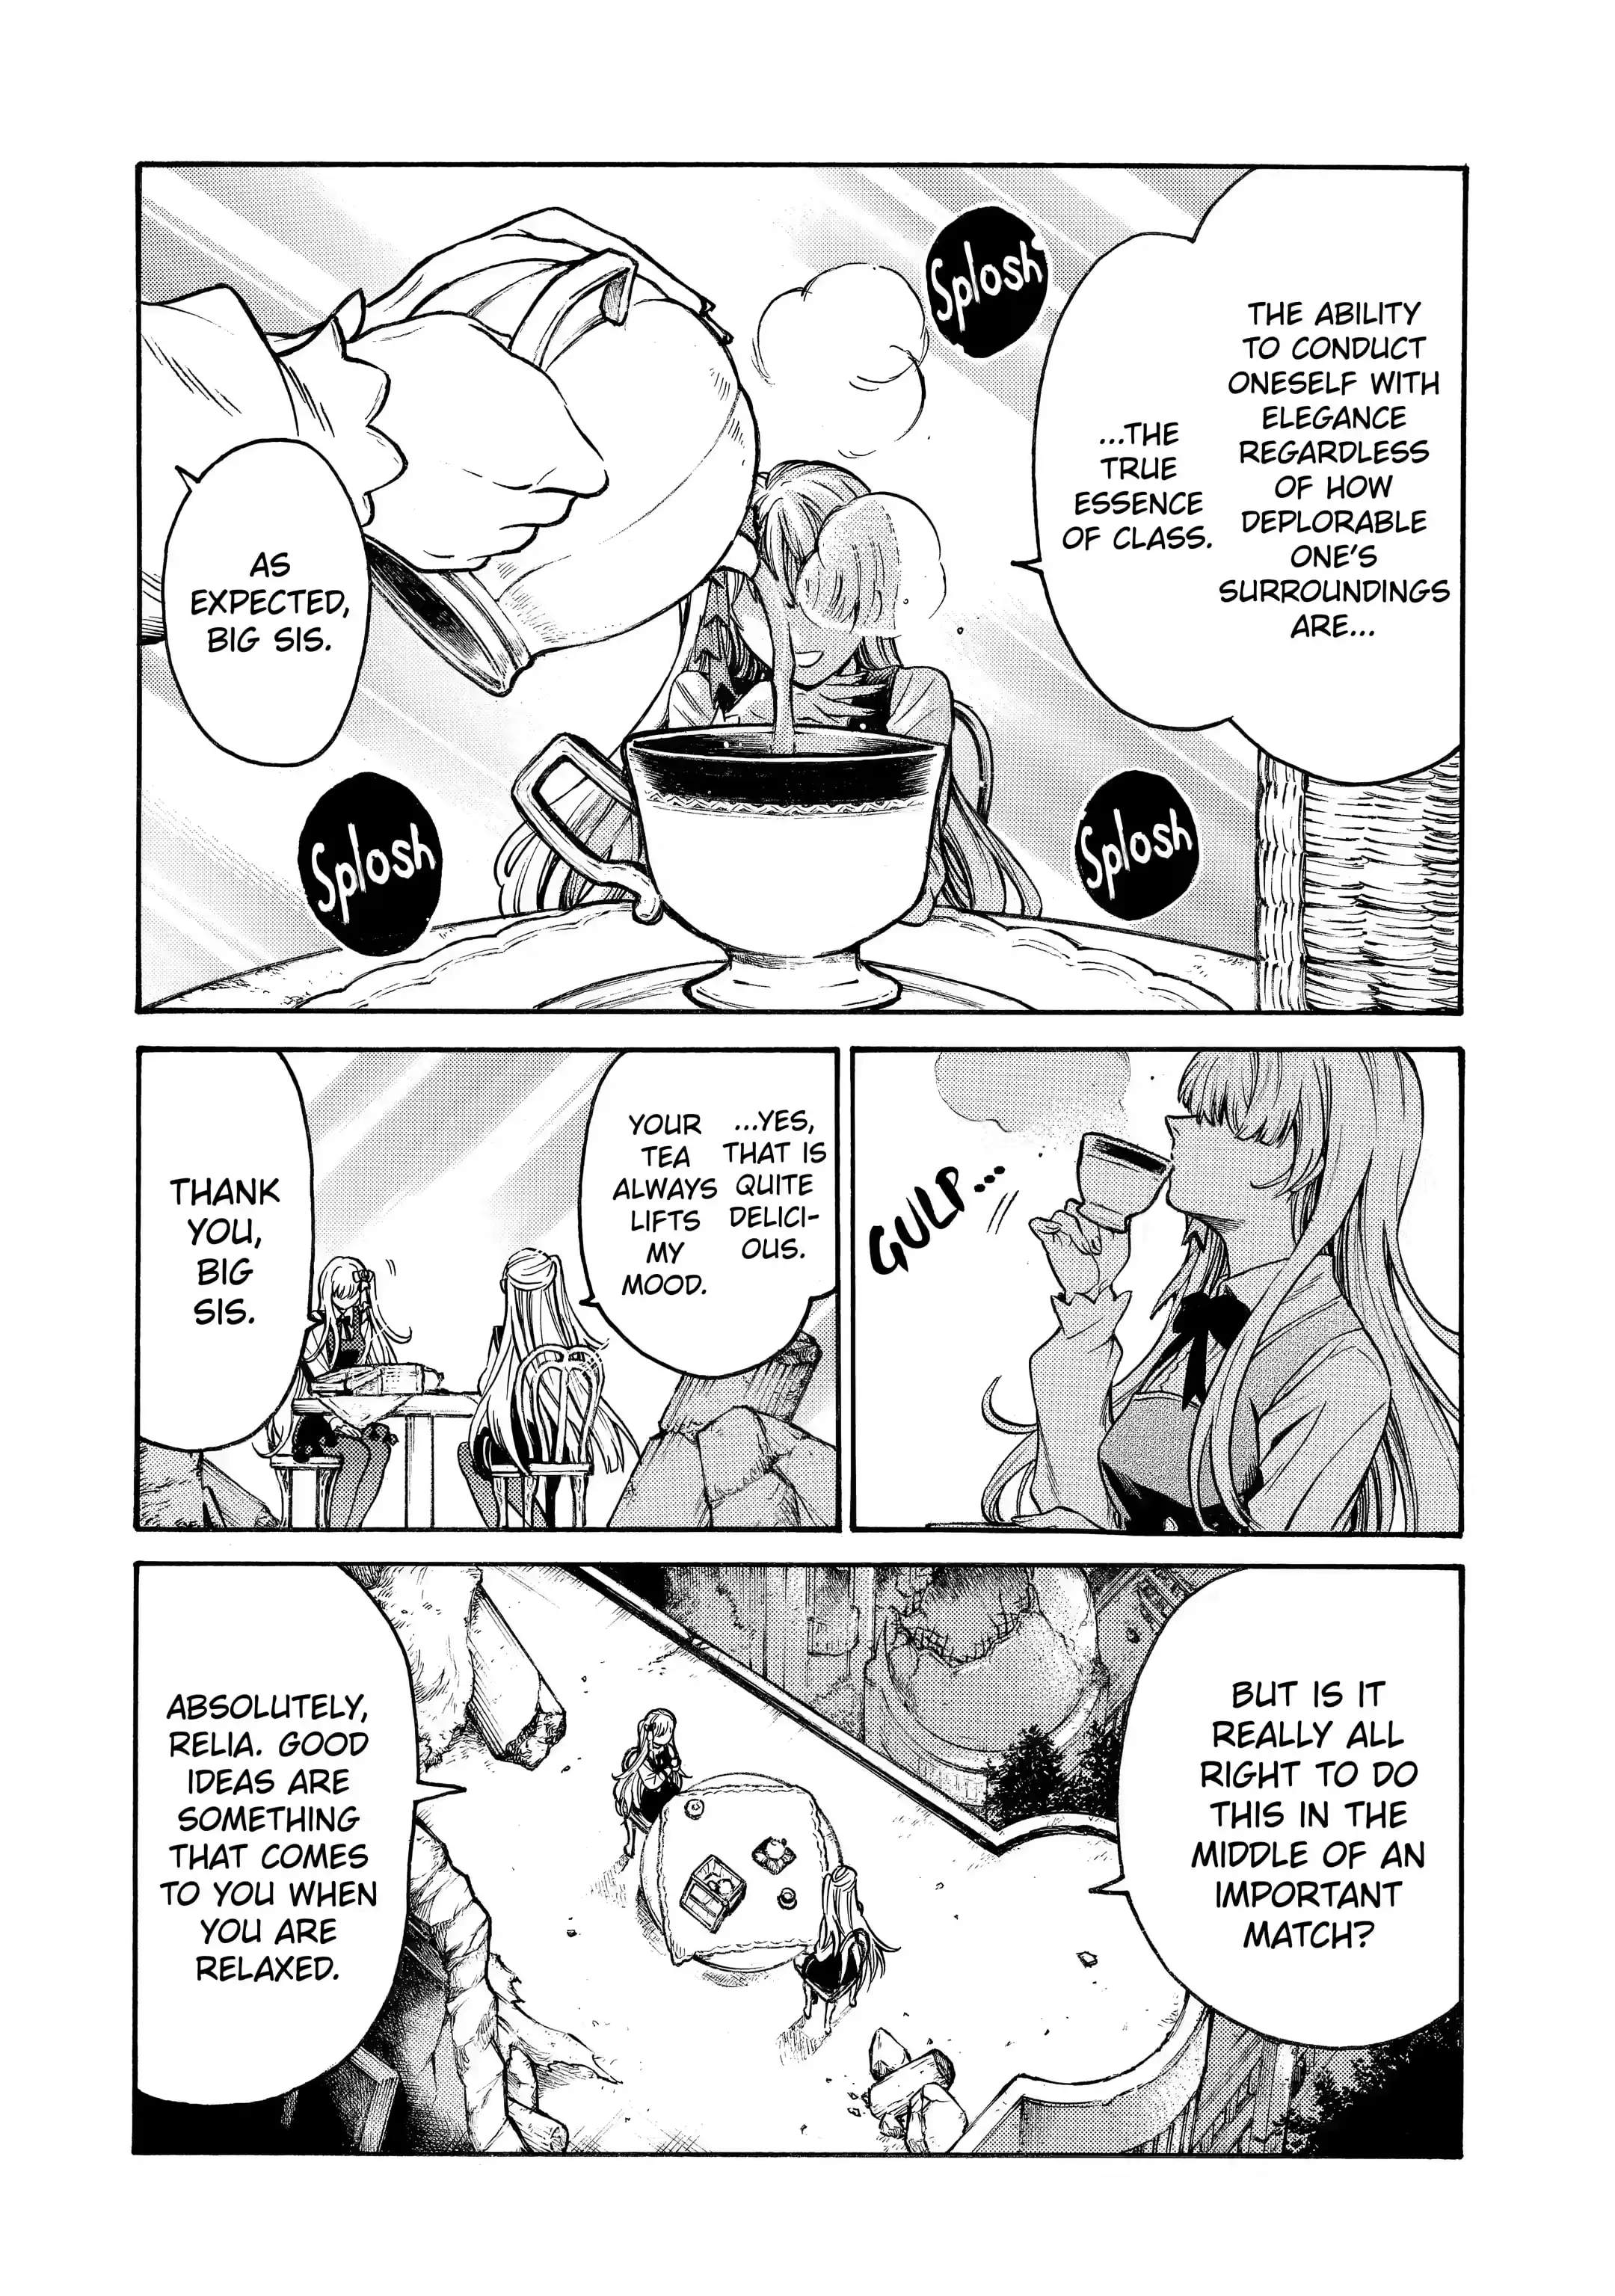 Reincarnation of the Unrivalled Time Mage: The Underachiever at the Magic Academy Turns Out to Be the Strongest Mage Who Controls Time! Chapter 16.4-eng-li - Page 8